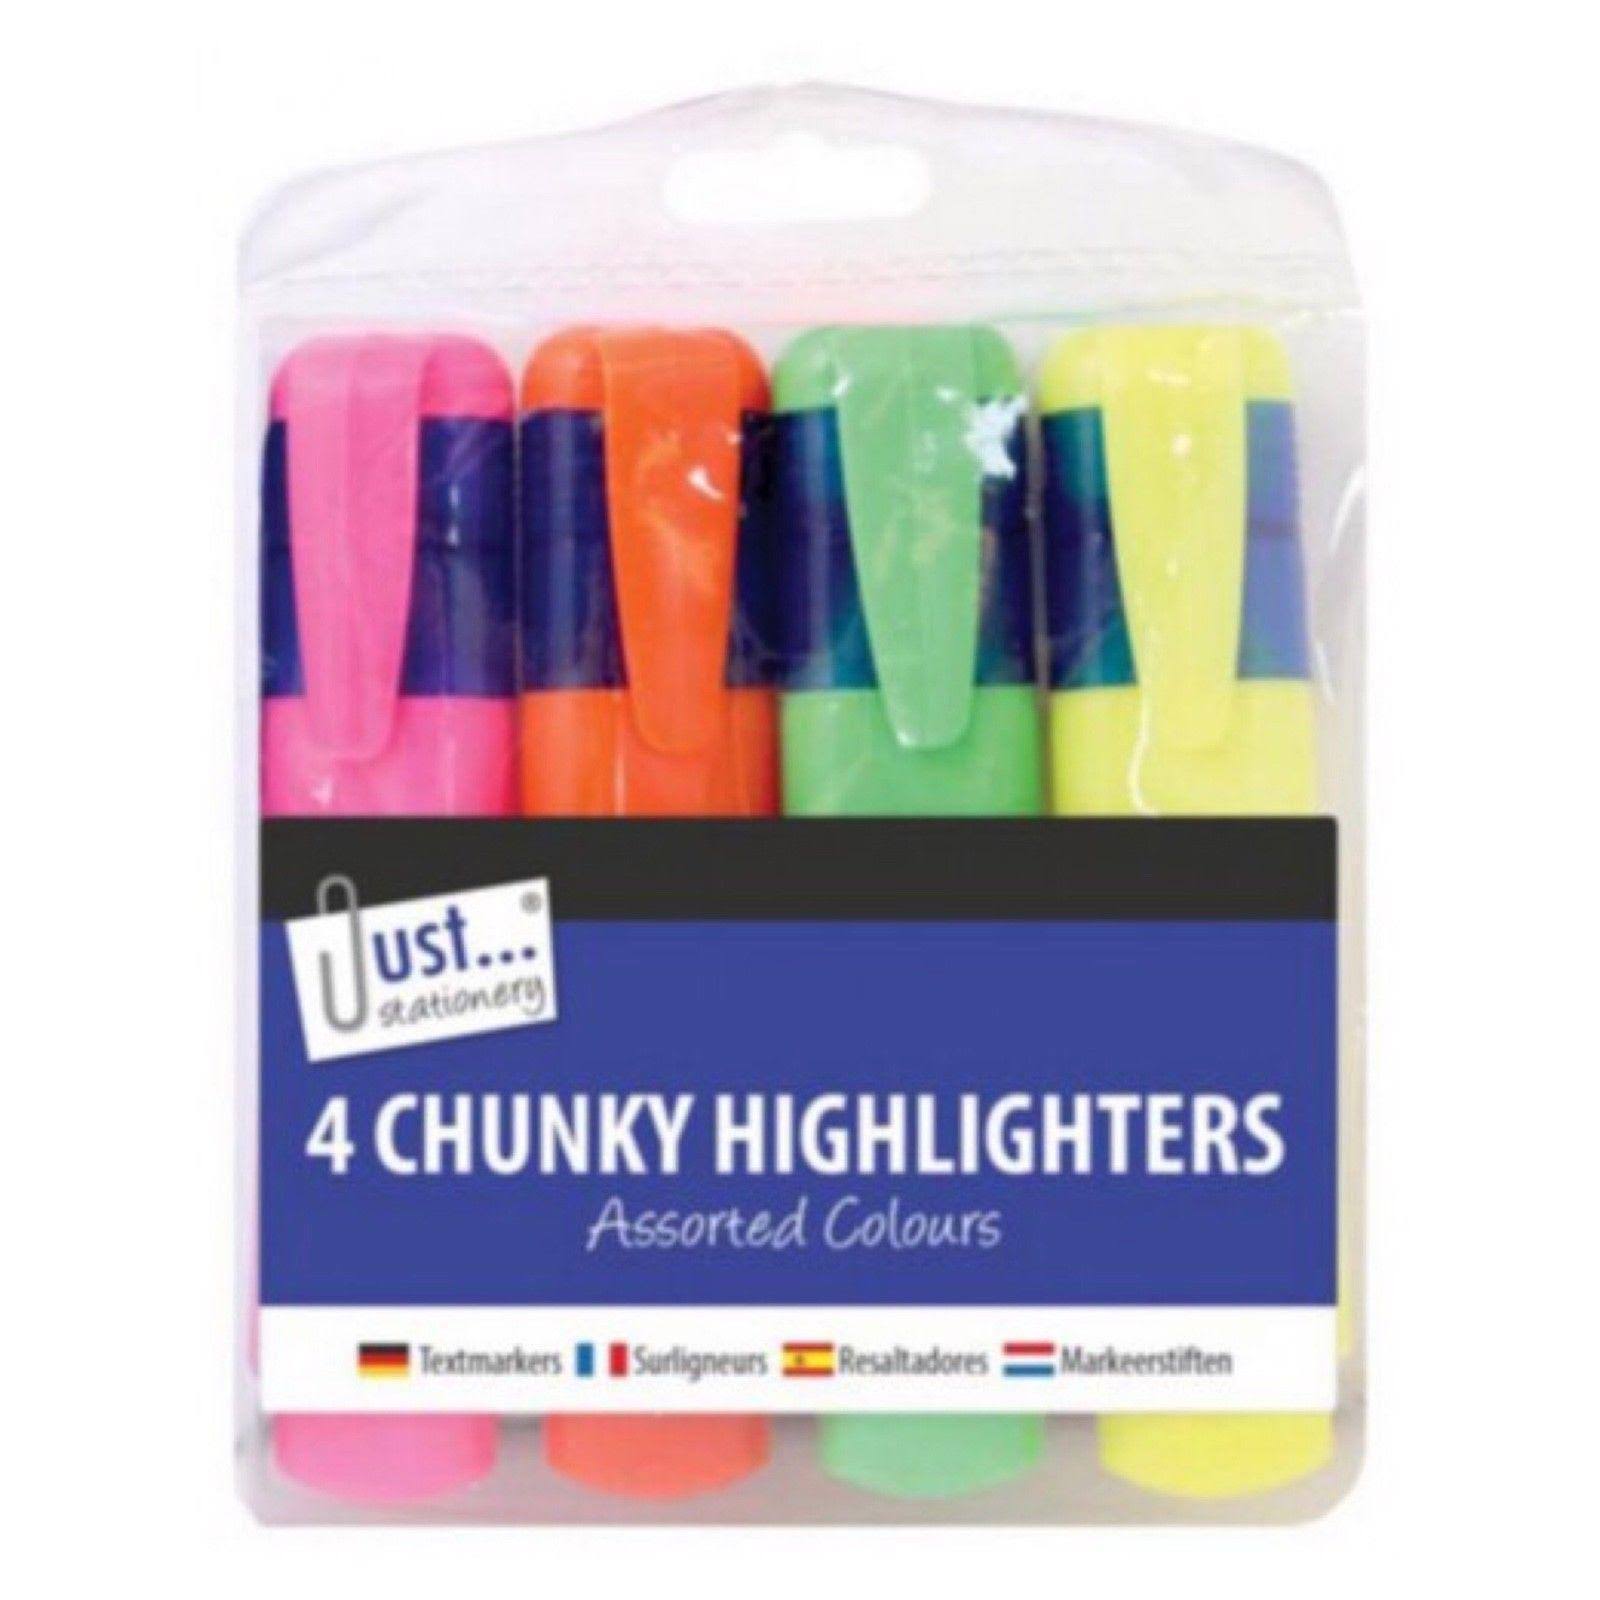 Chunky Highlighters Assorted Colour Chisel Pens Markers Office - 4pc